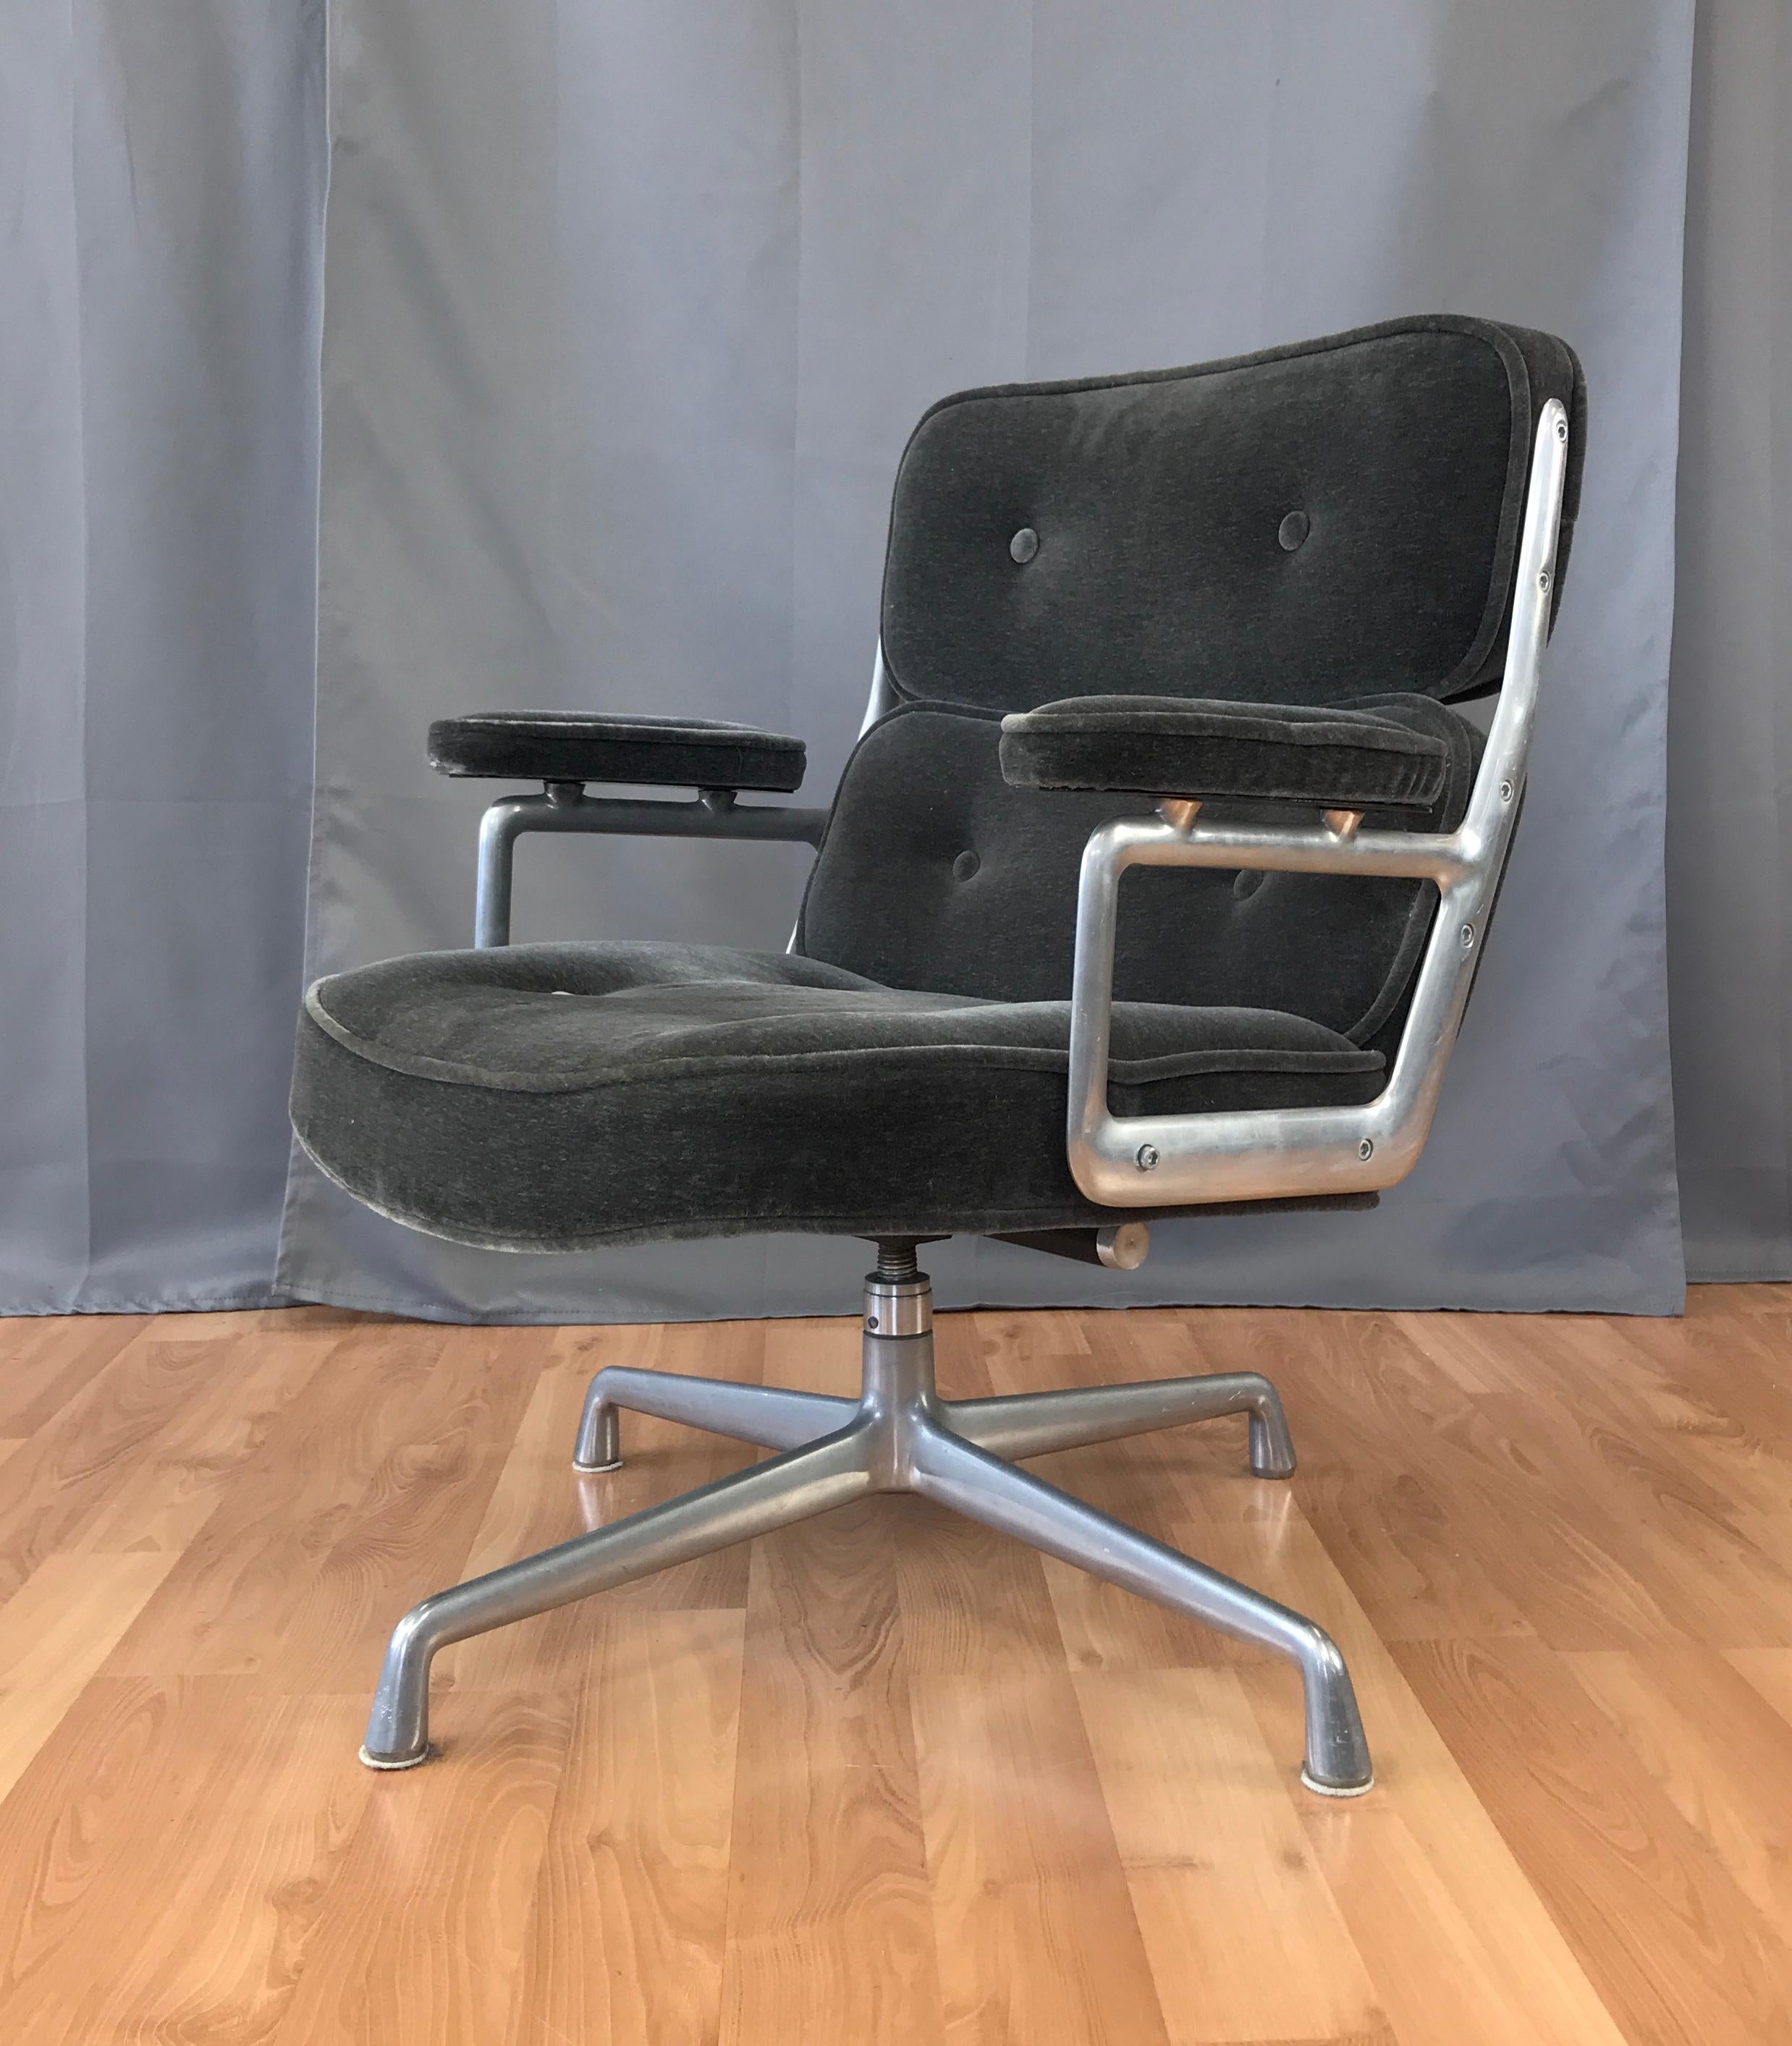 The iconic Time Life chair designed by Charles and Ray Eames for the lobby of the Time Life building in the 1960s. This chair is considered by many to be the most comfortable office chair ever made.

The unusual light charcoal colored upholstery